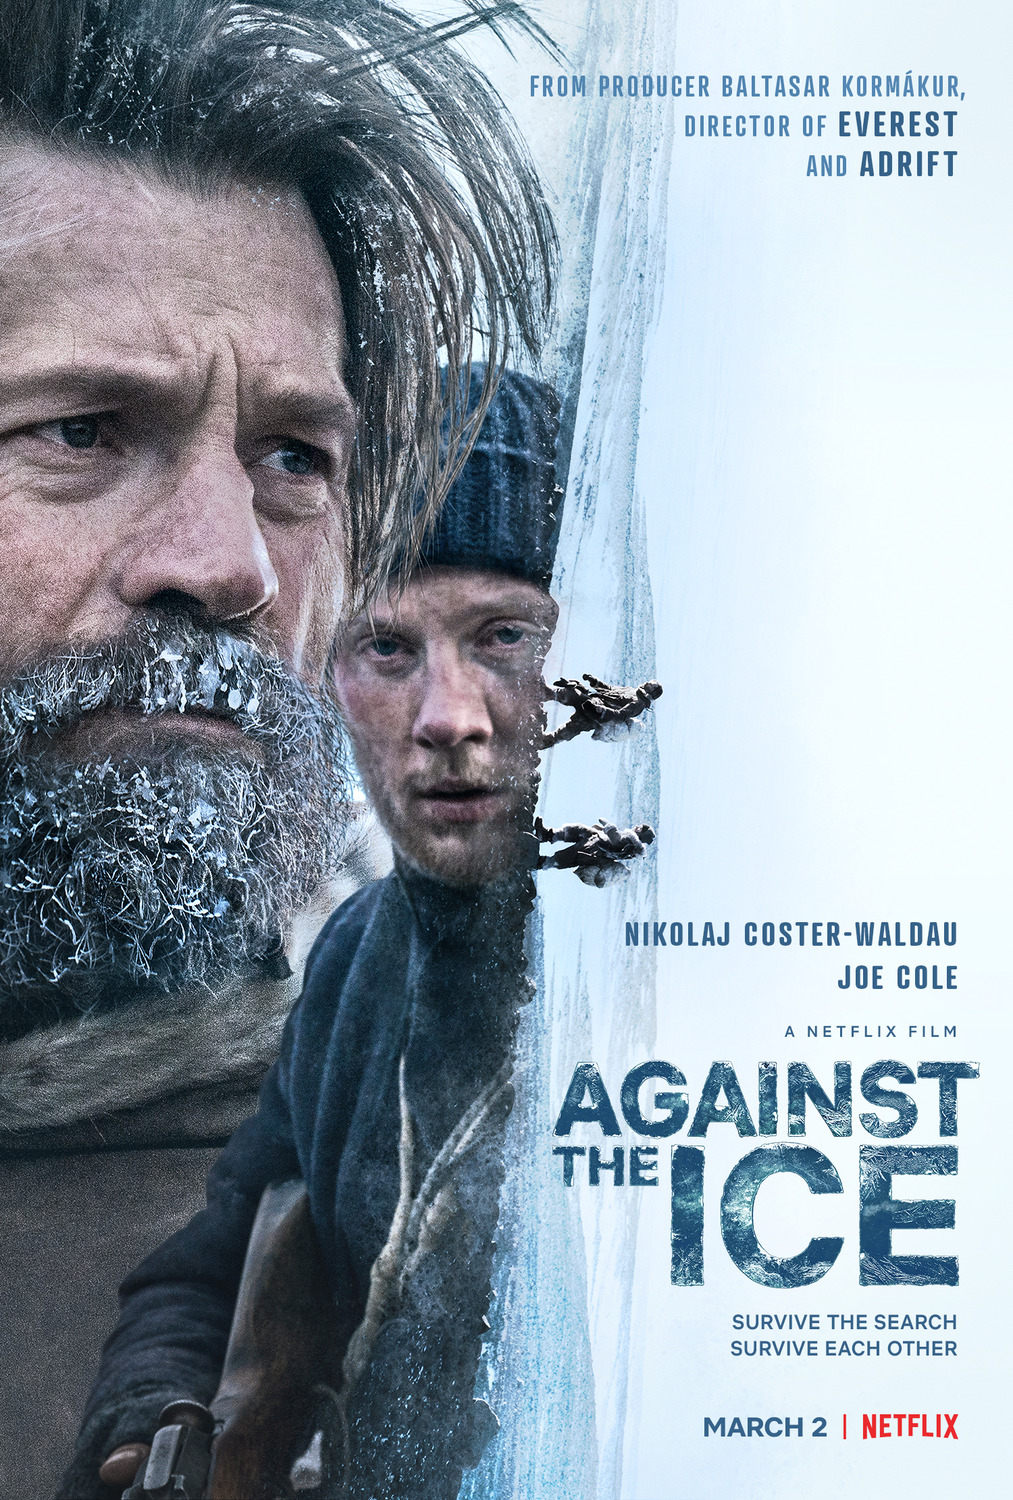 New survival movie with Against the Ice with Nikolai Coster-Waldau